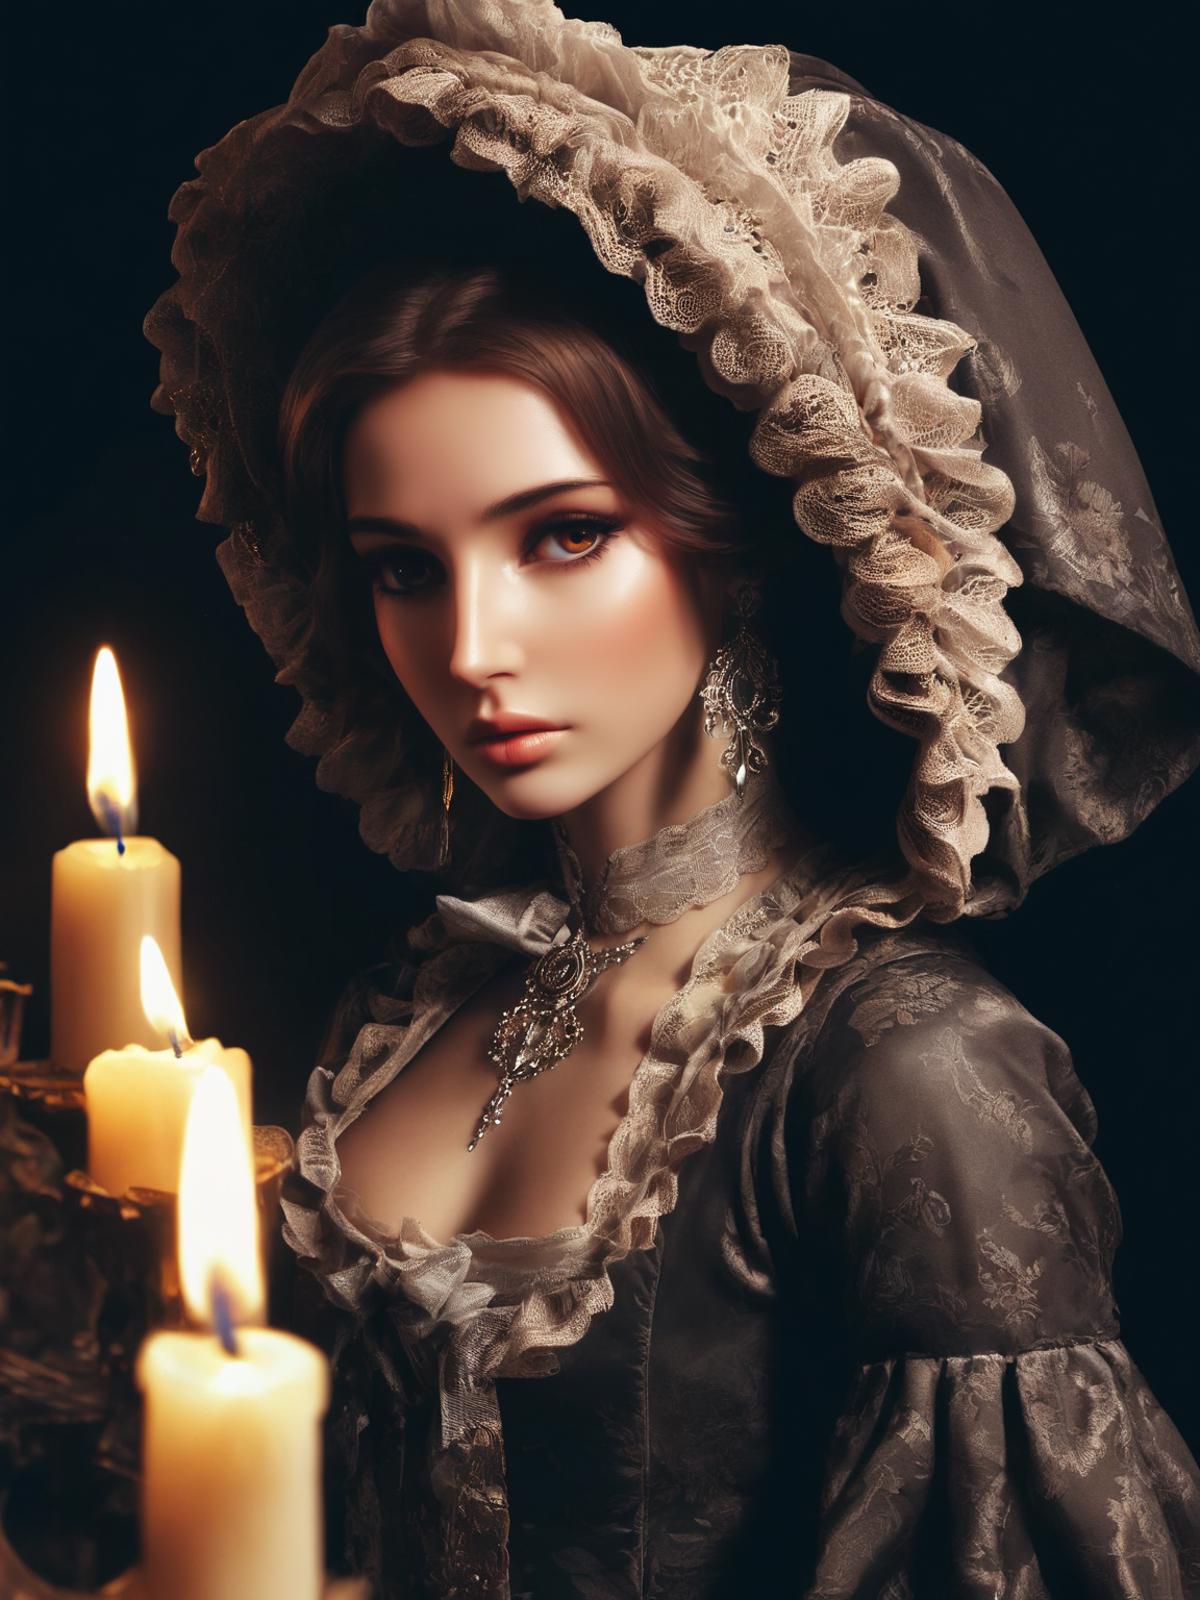 A woman in colonial clothing posing in the dark with lit candles.